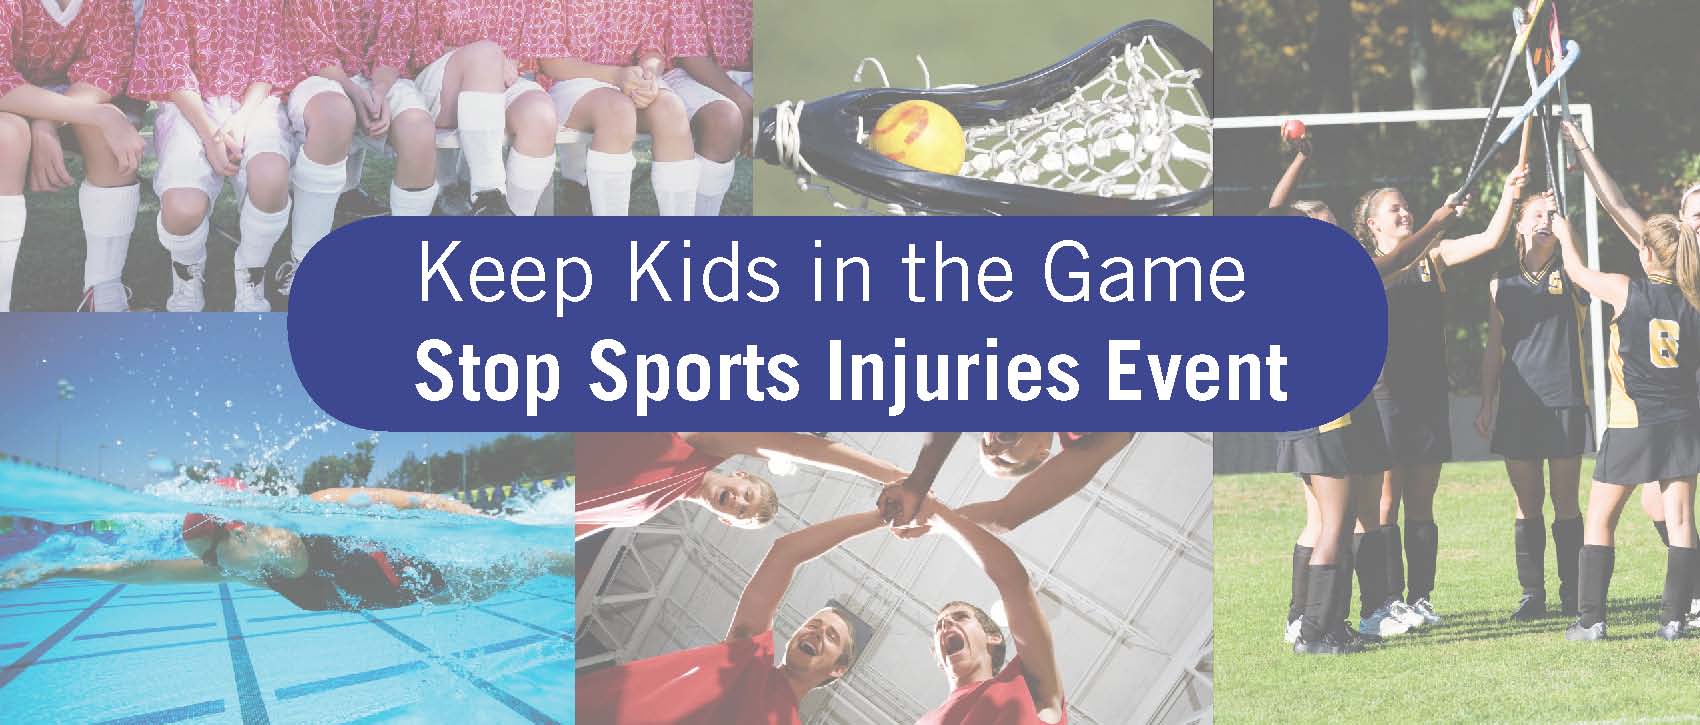 keep kids in the game stop sports injuries